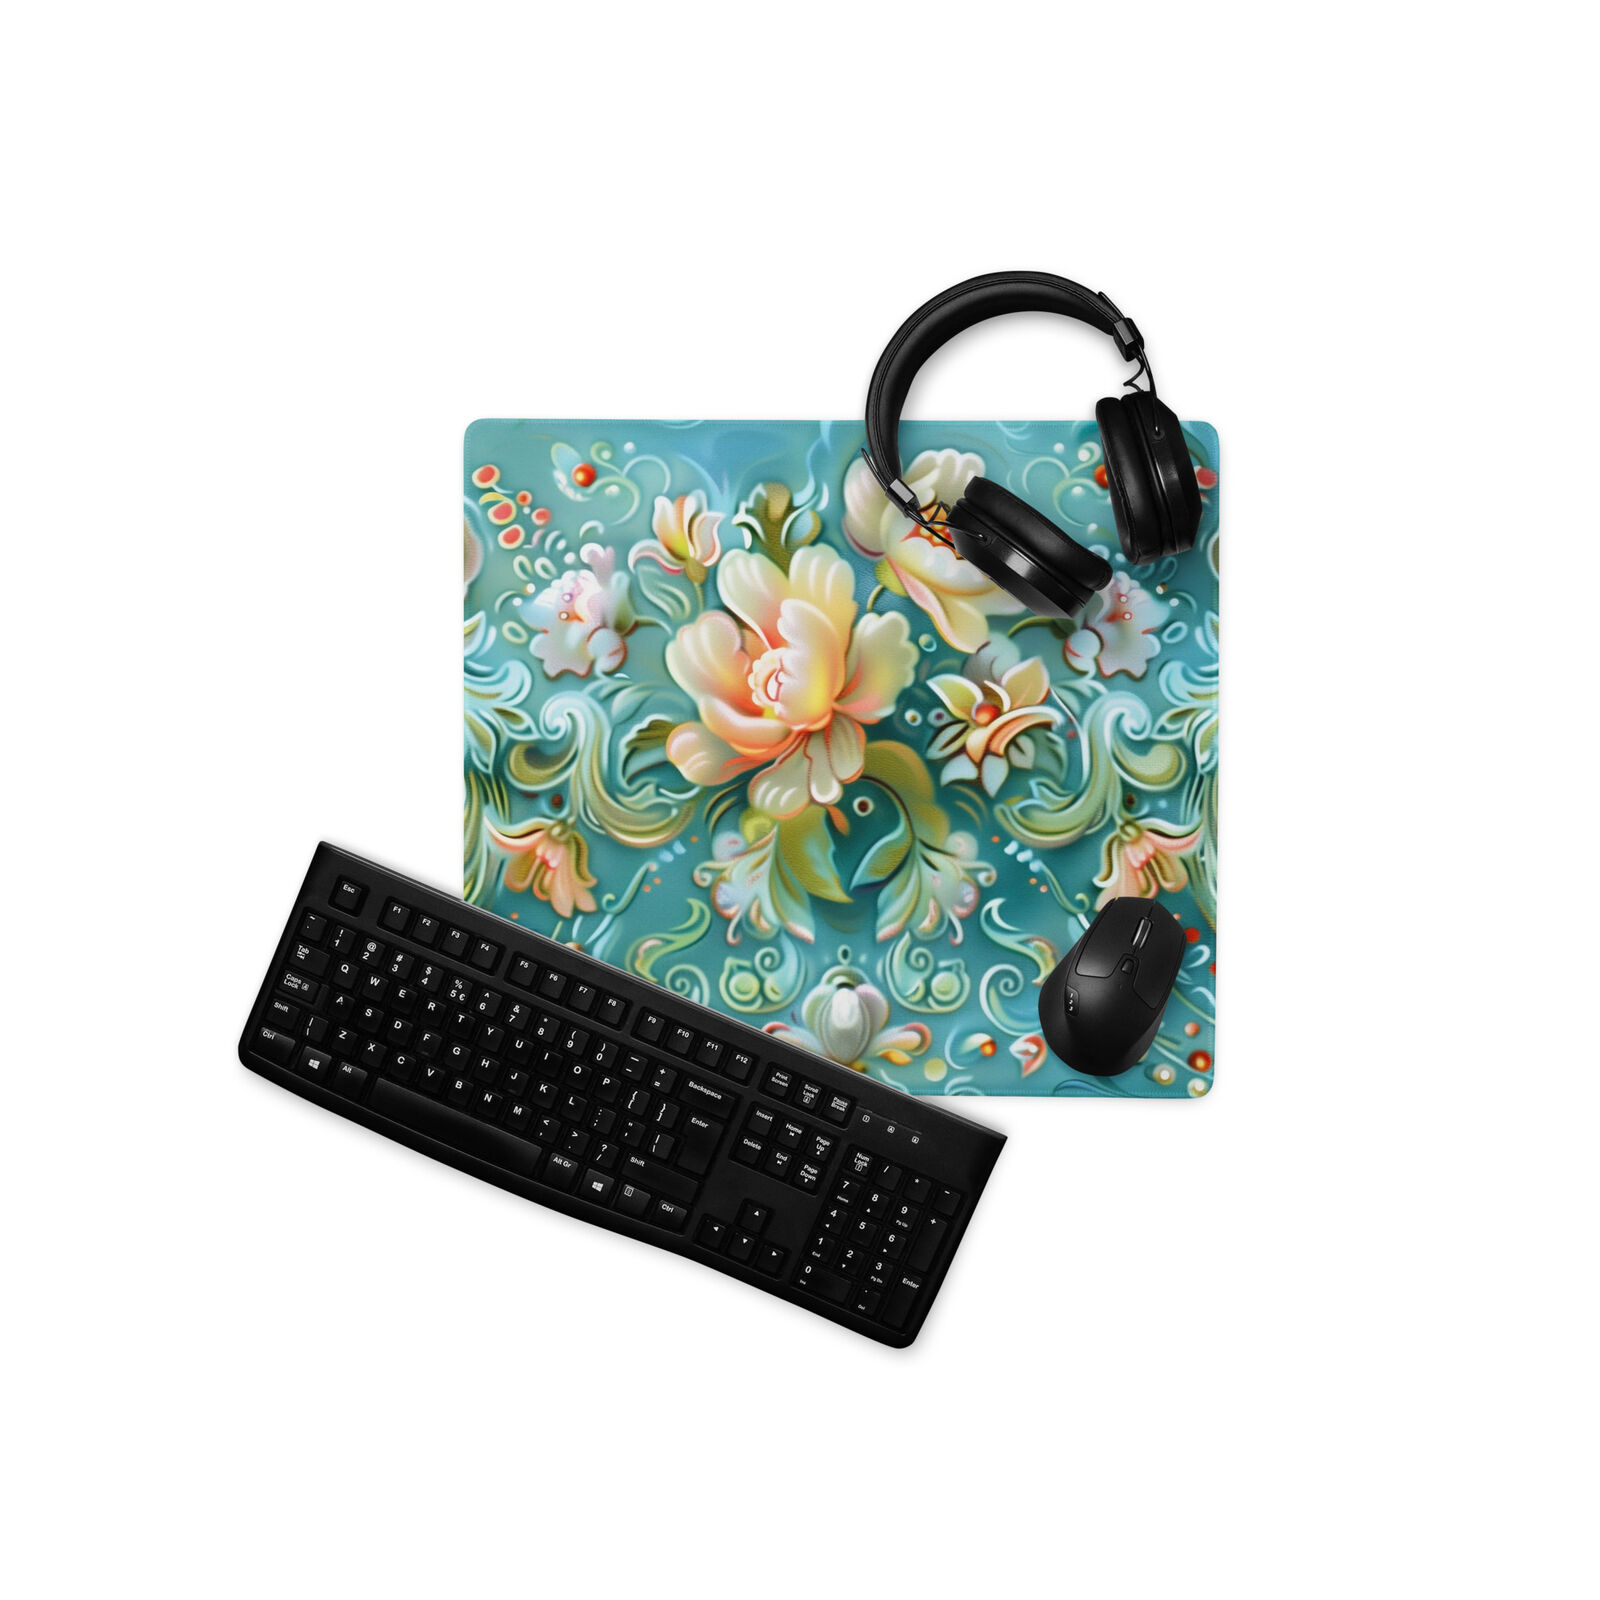 Pearls & Roses Gaming Mouse Pad, Floral Mousepad, Vintage Print Extended Deskmat